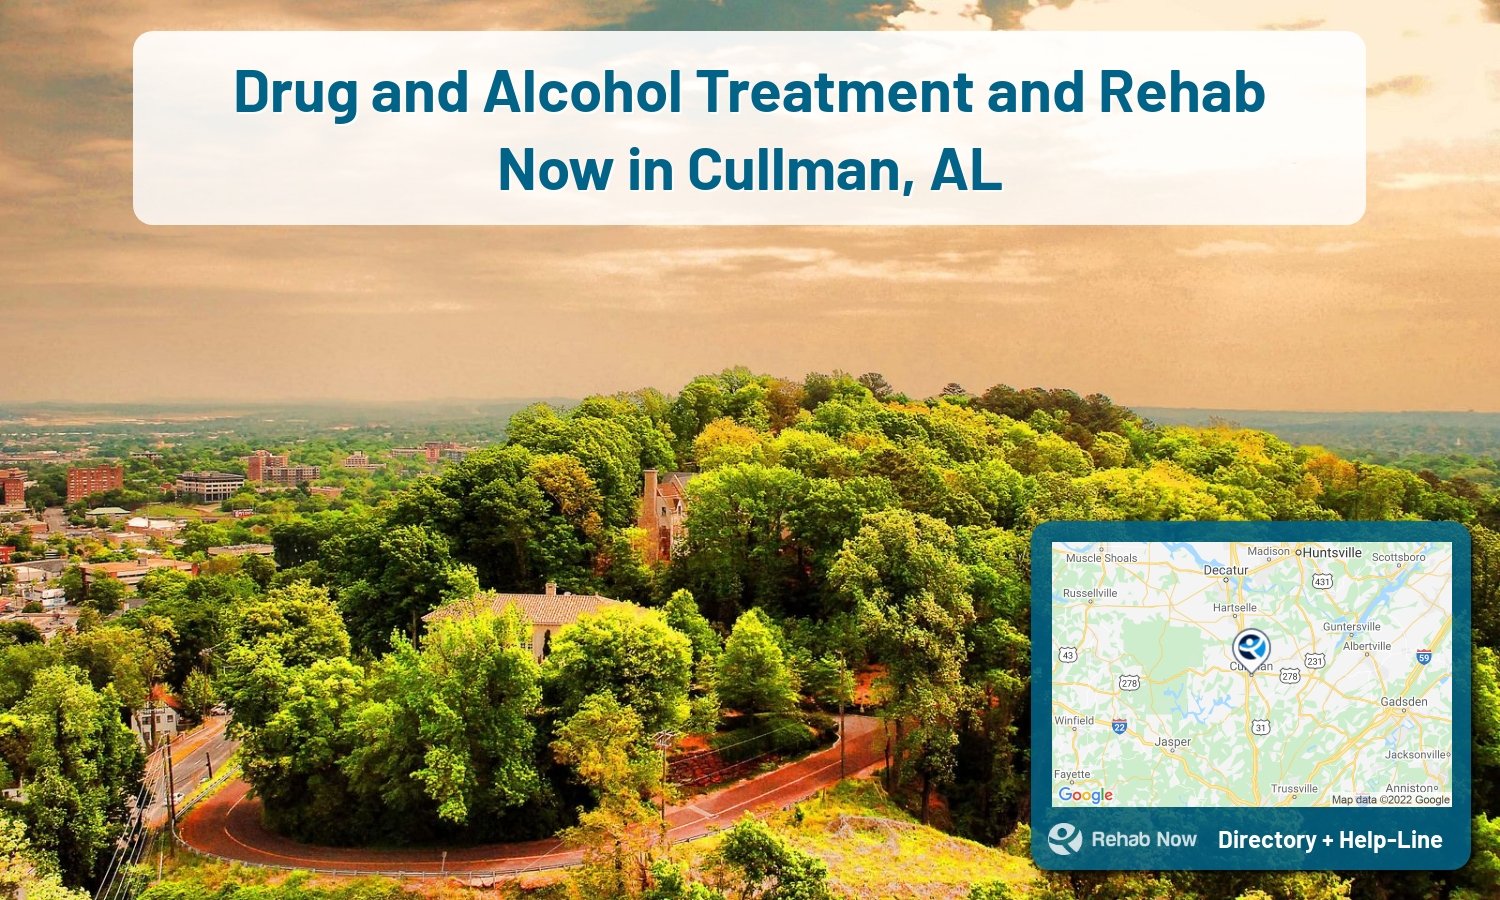 Cullman, AL Treatment Centers. Find drug rehab in Cullman, Alabama, or detox and treatment programs. Get the right help now!